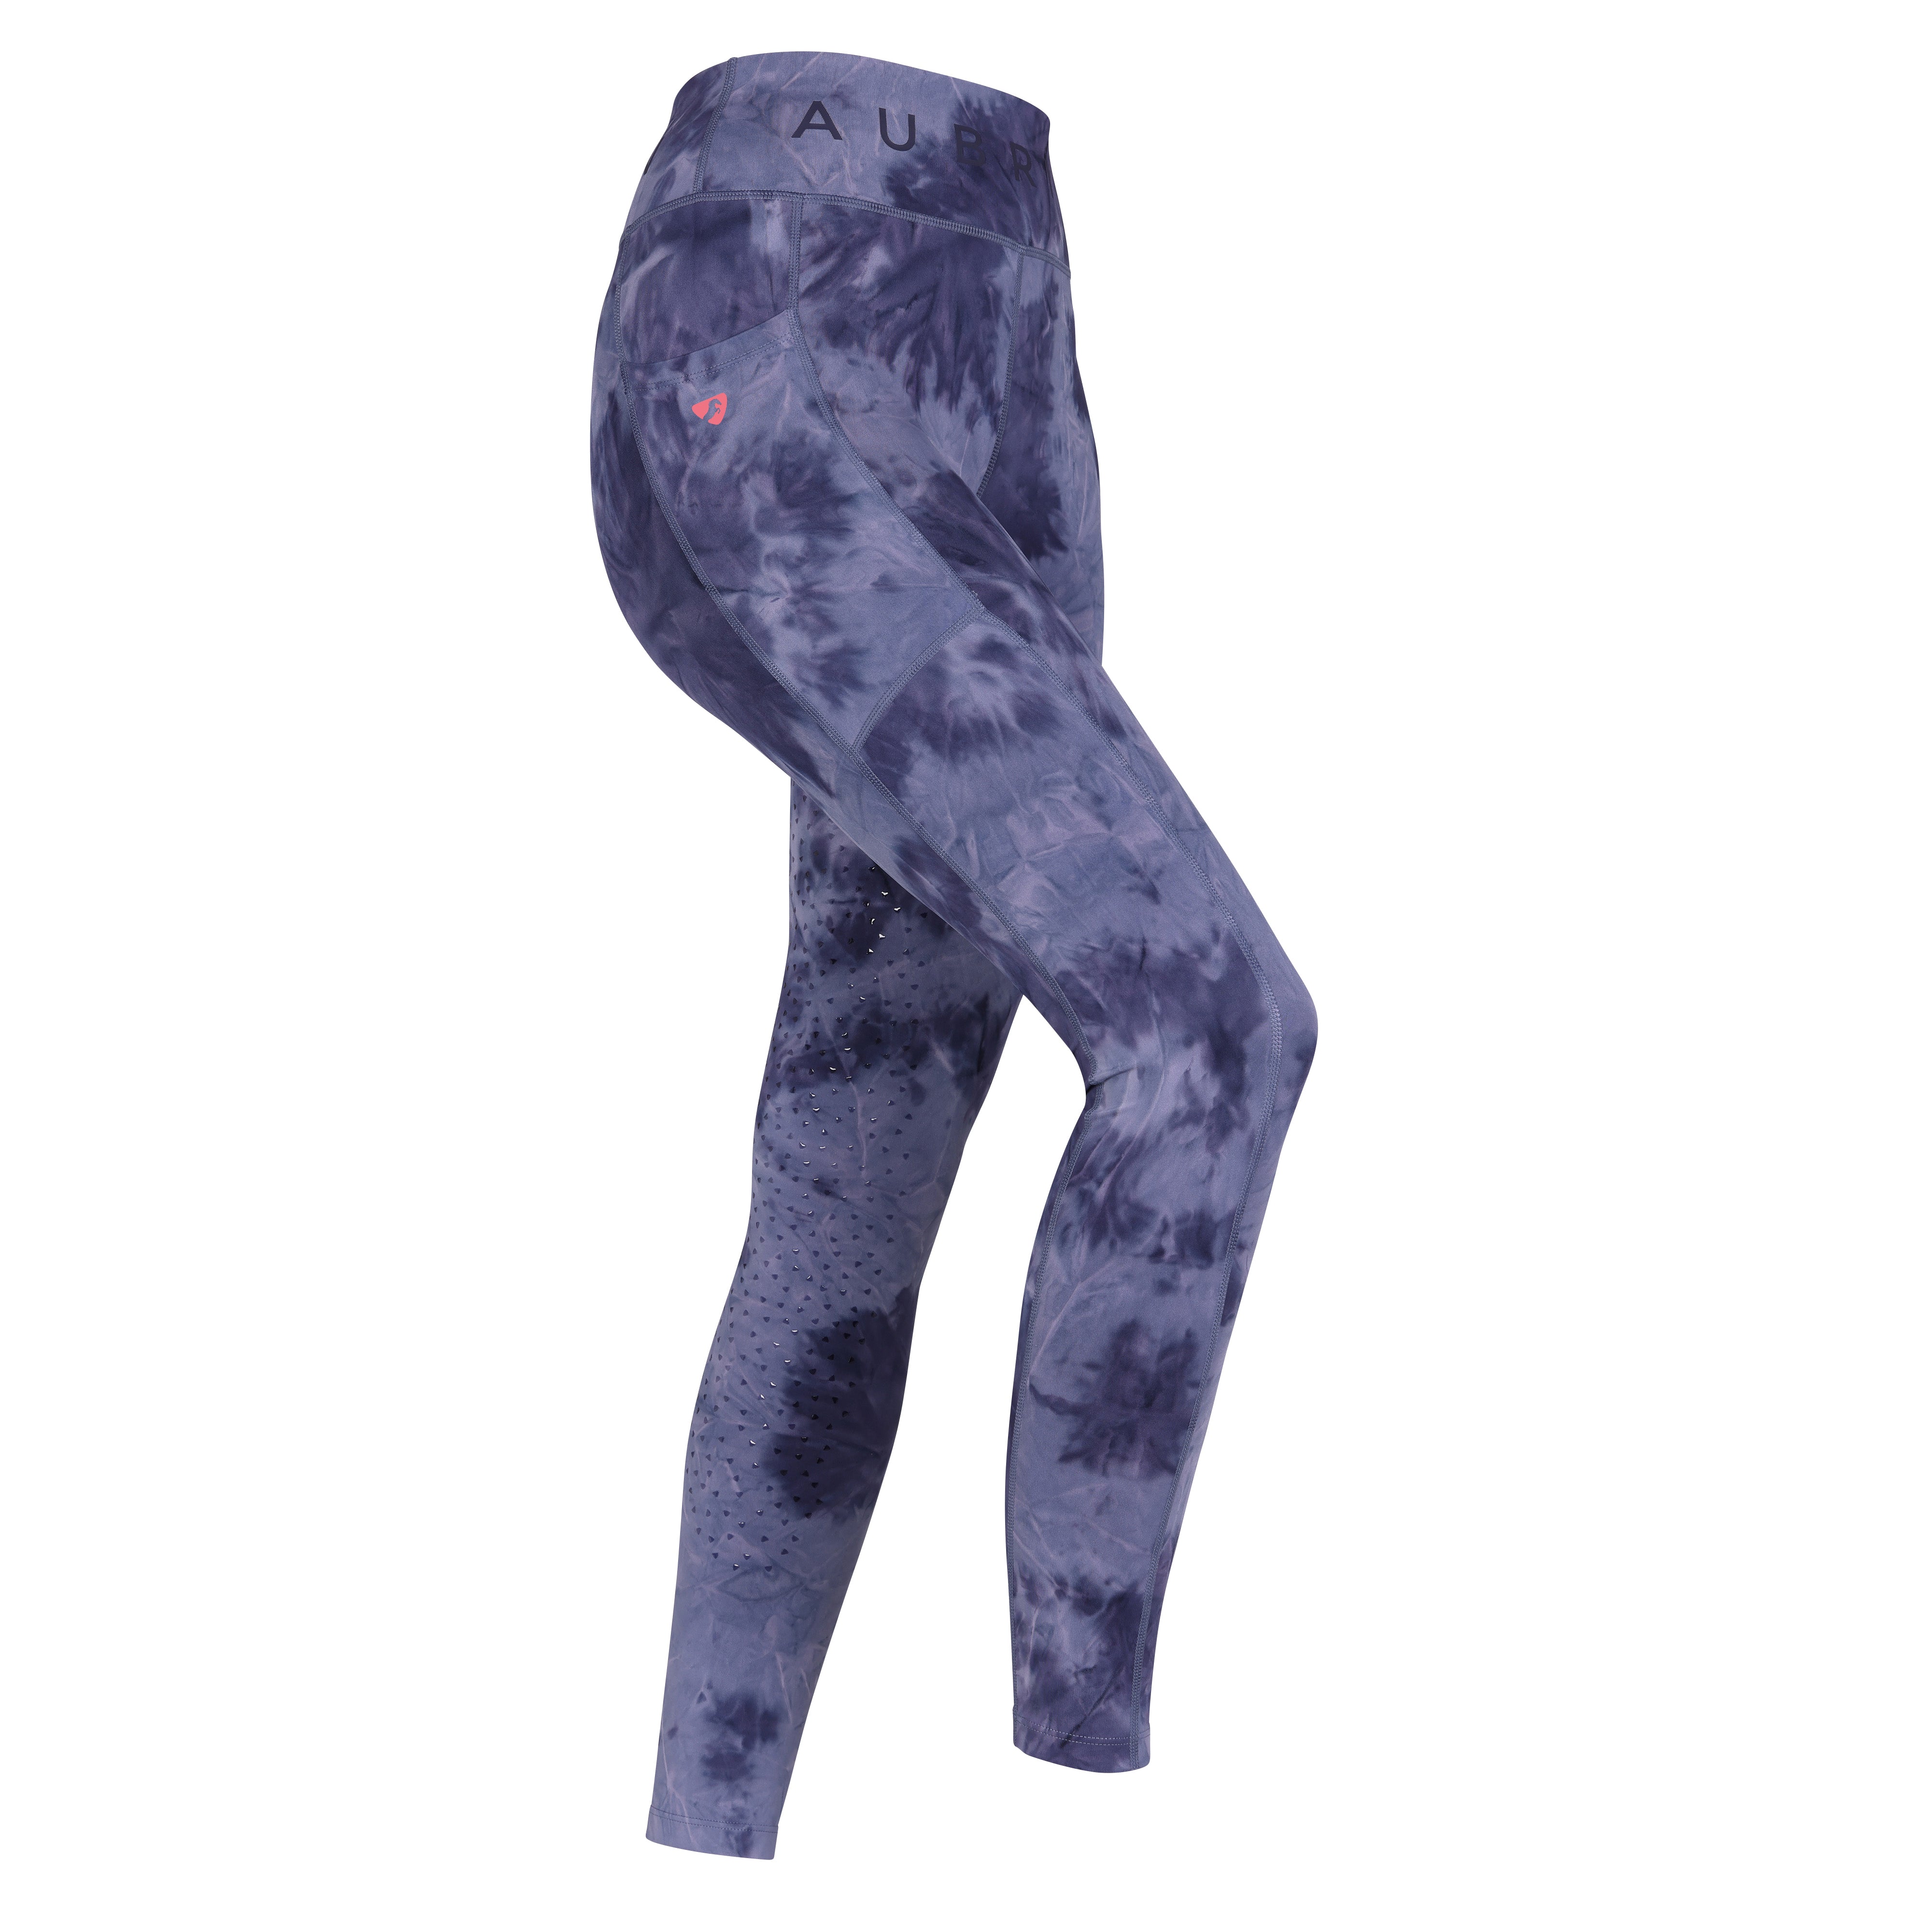 Shires Ladies Aubrion Non-Stop Riding Tights